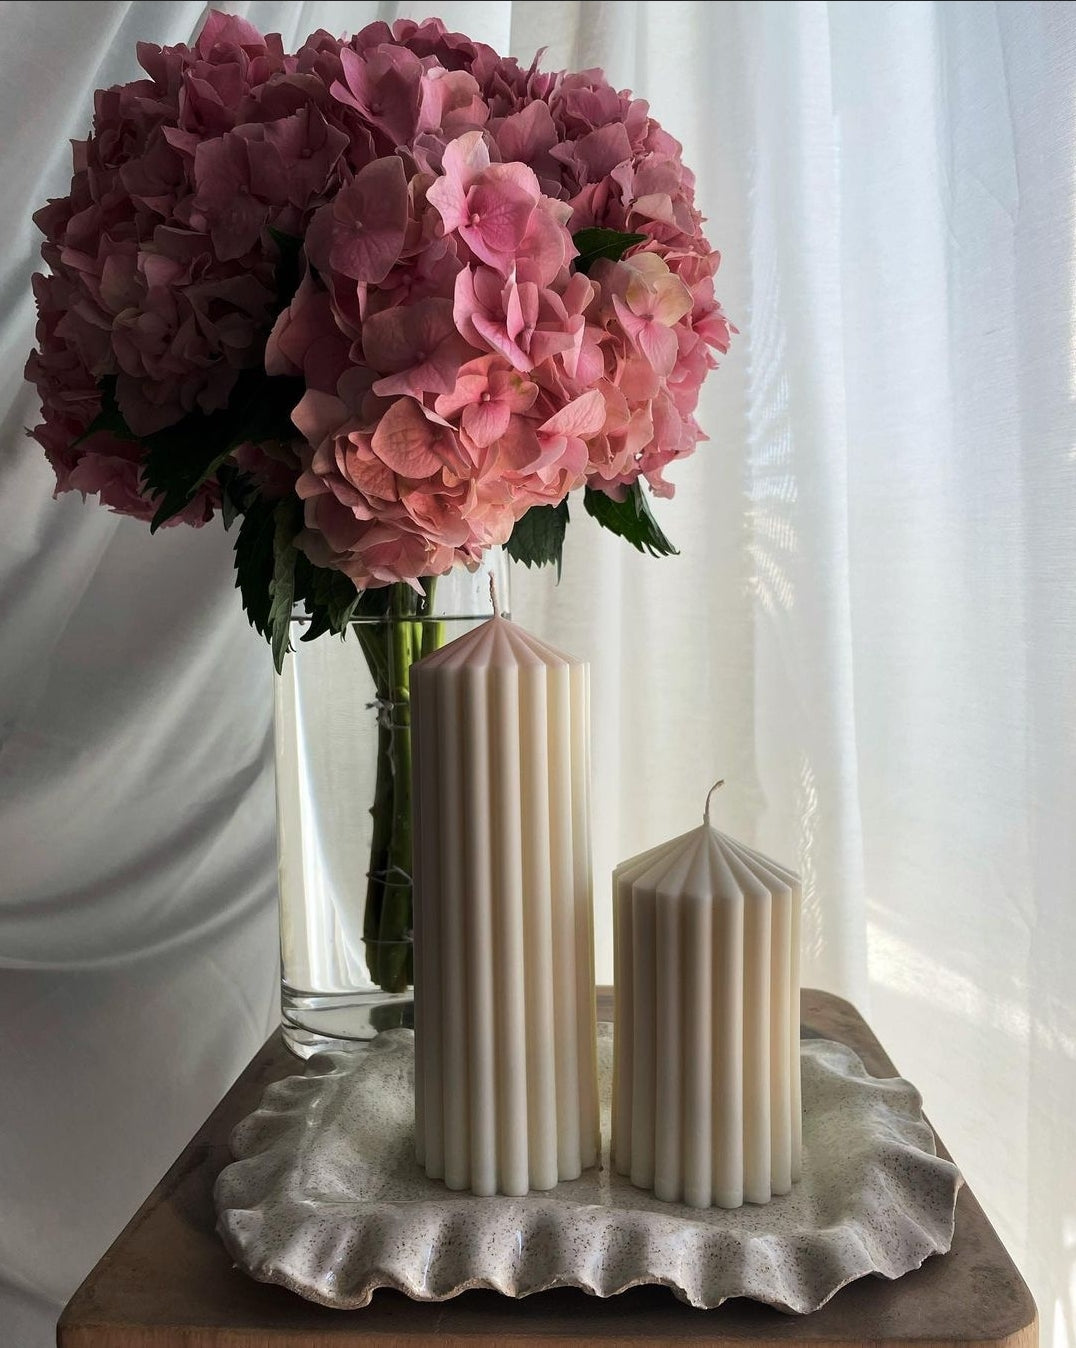 Circus Pillar Candle Moulds 1 - Silicone Mould, Mold for DIY Candles. Created using candle making kit with cotton candle wicks and candle colour chips. Using soy wax for pillar candles. Sold by Myka Candles Moulds Australia